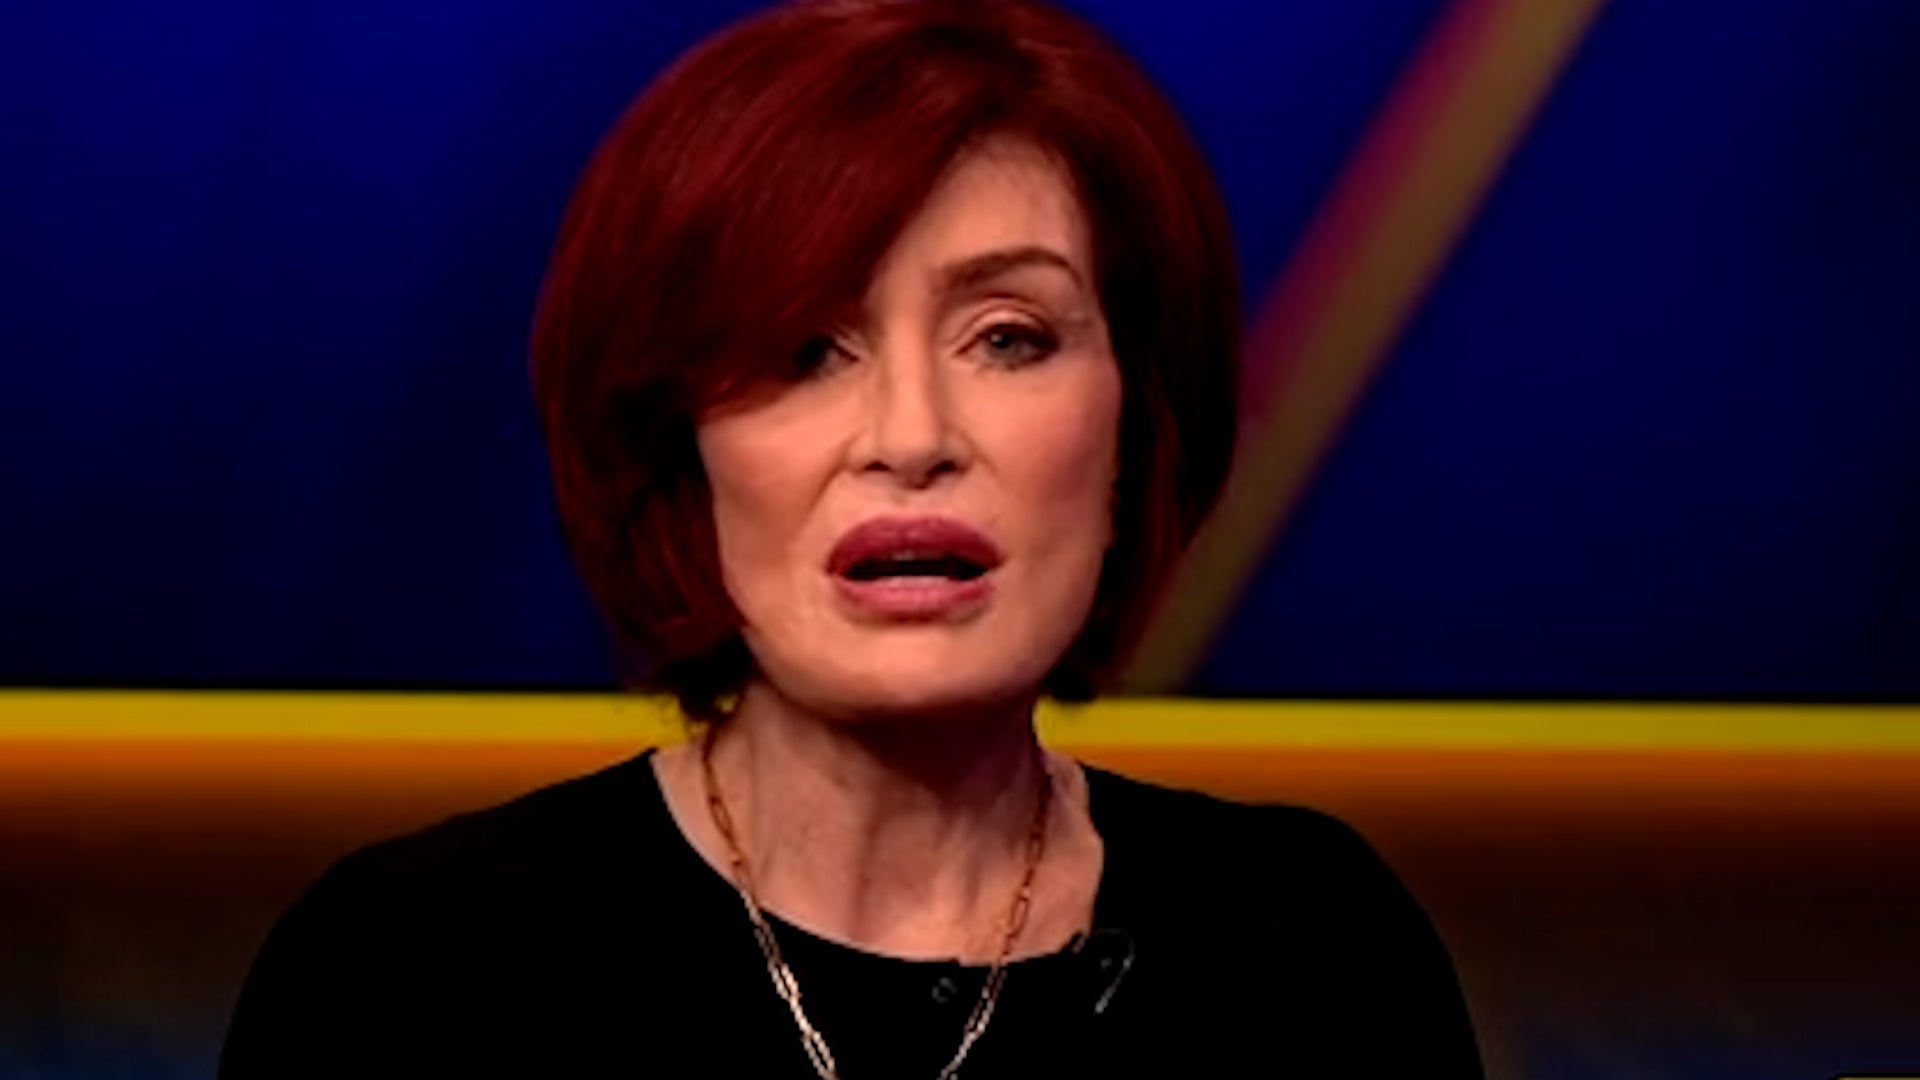 Sharon Osbourne has admitted vanity drives her to try and look young